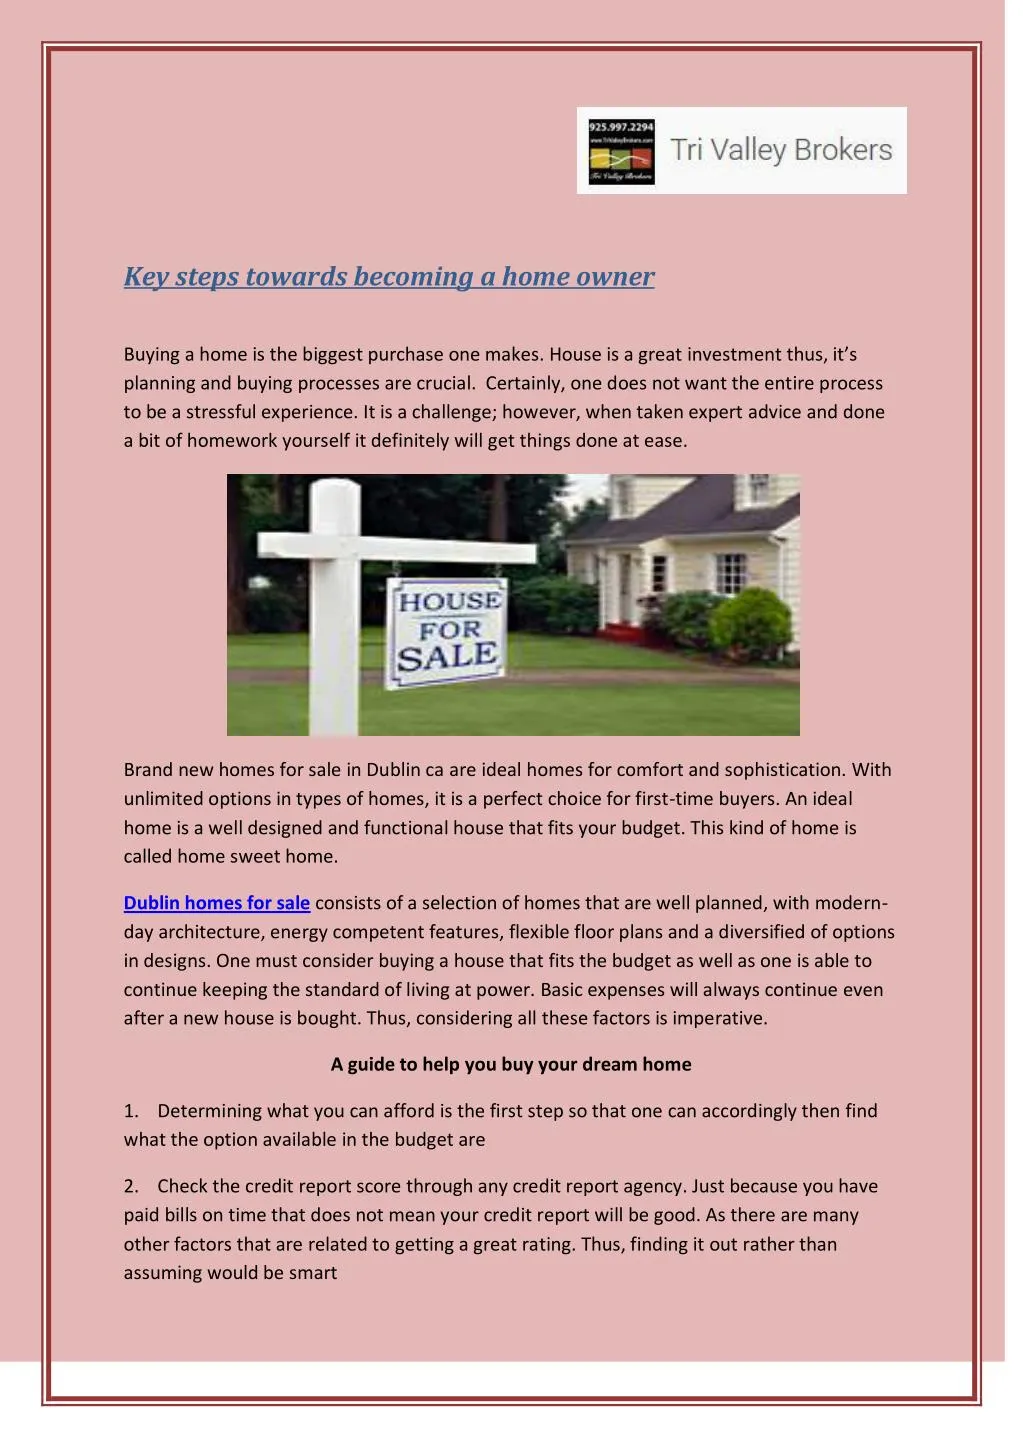 key steps towards becoming a home owner